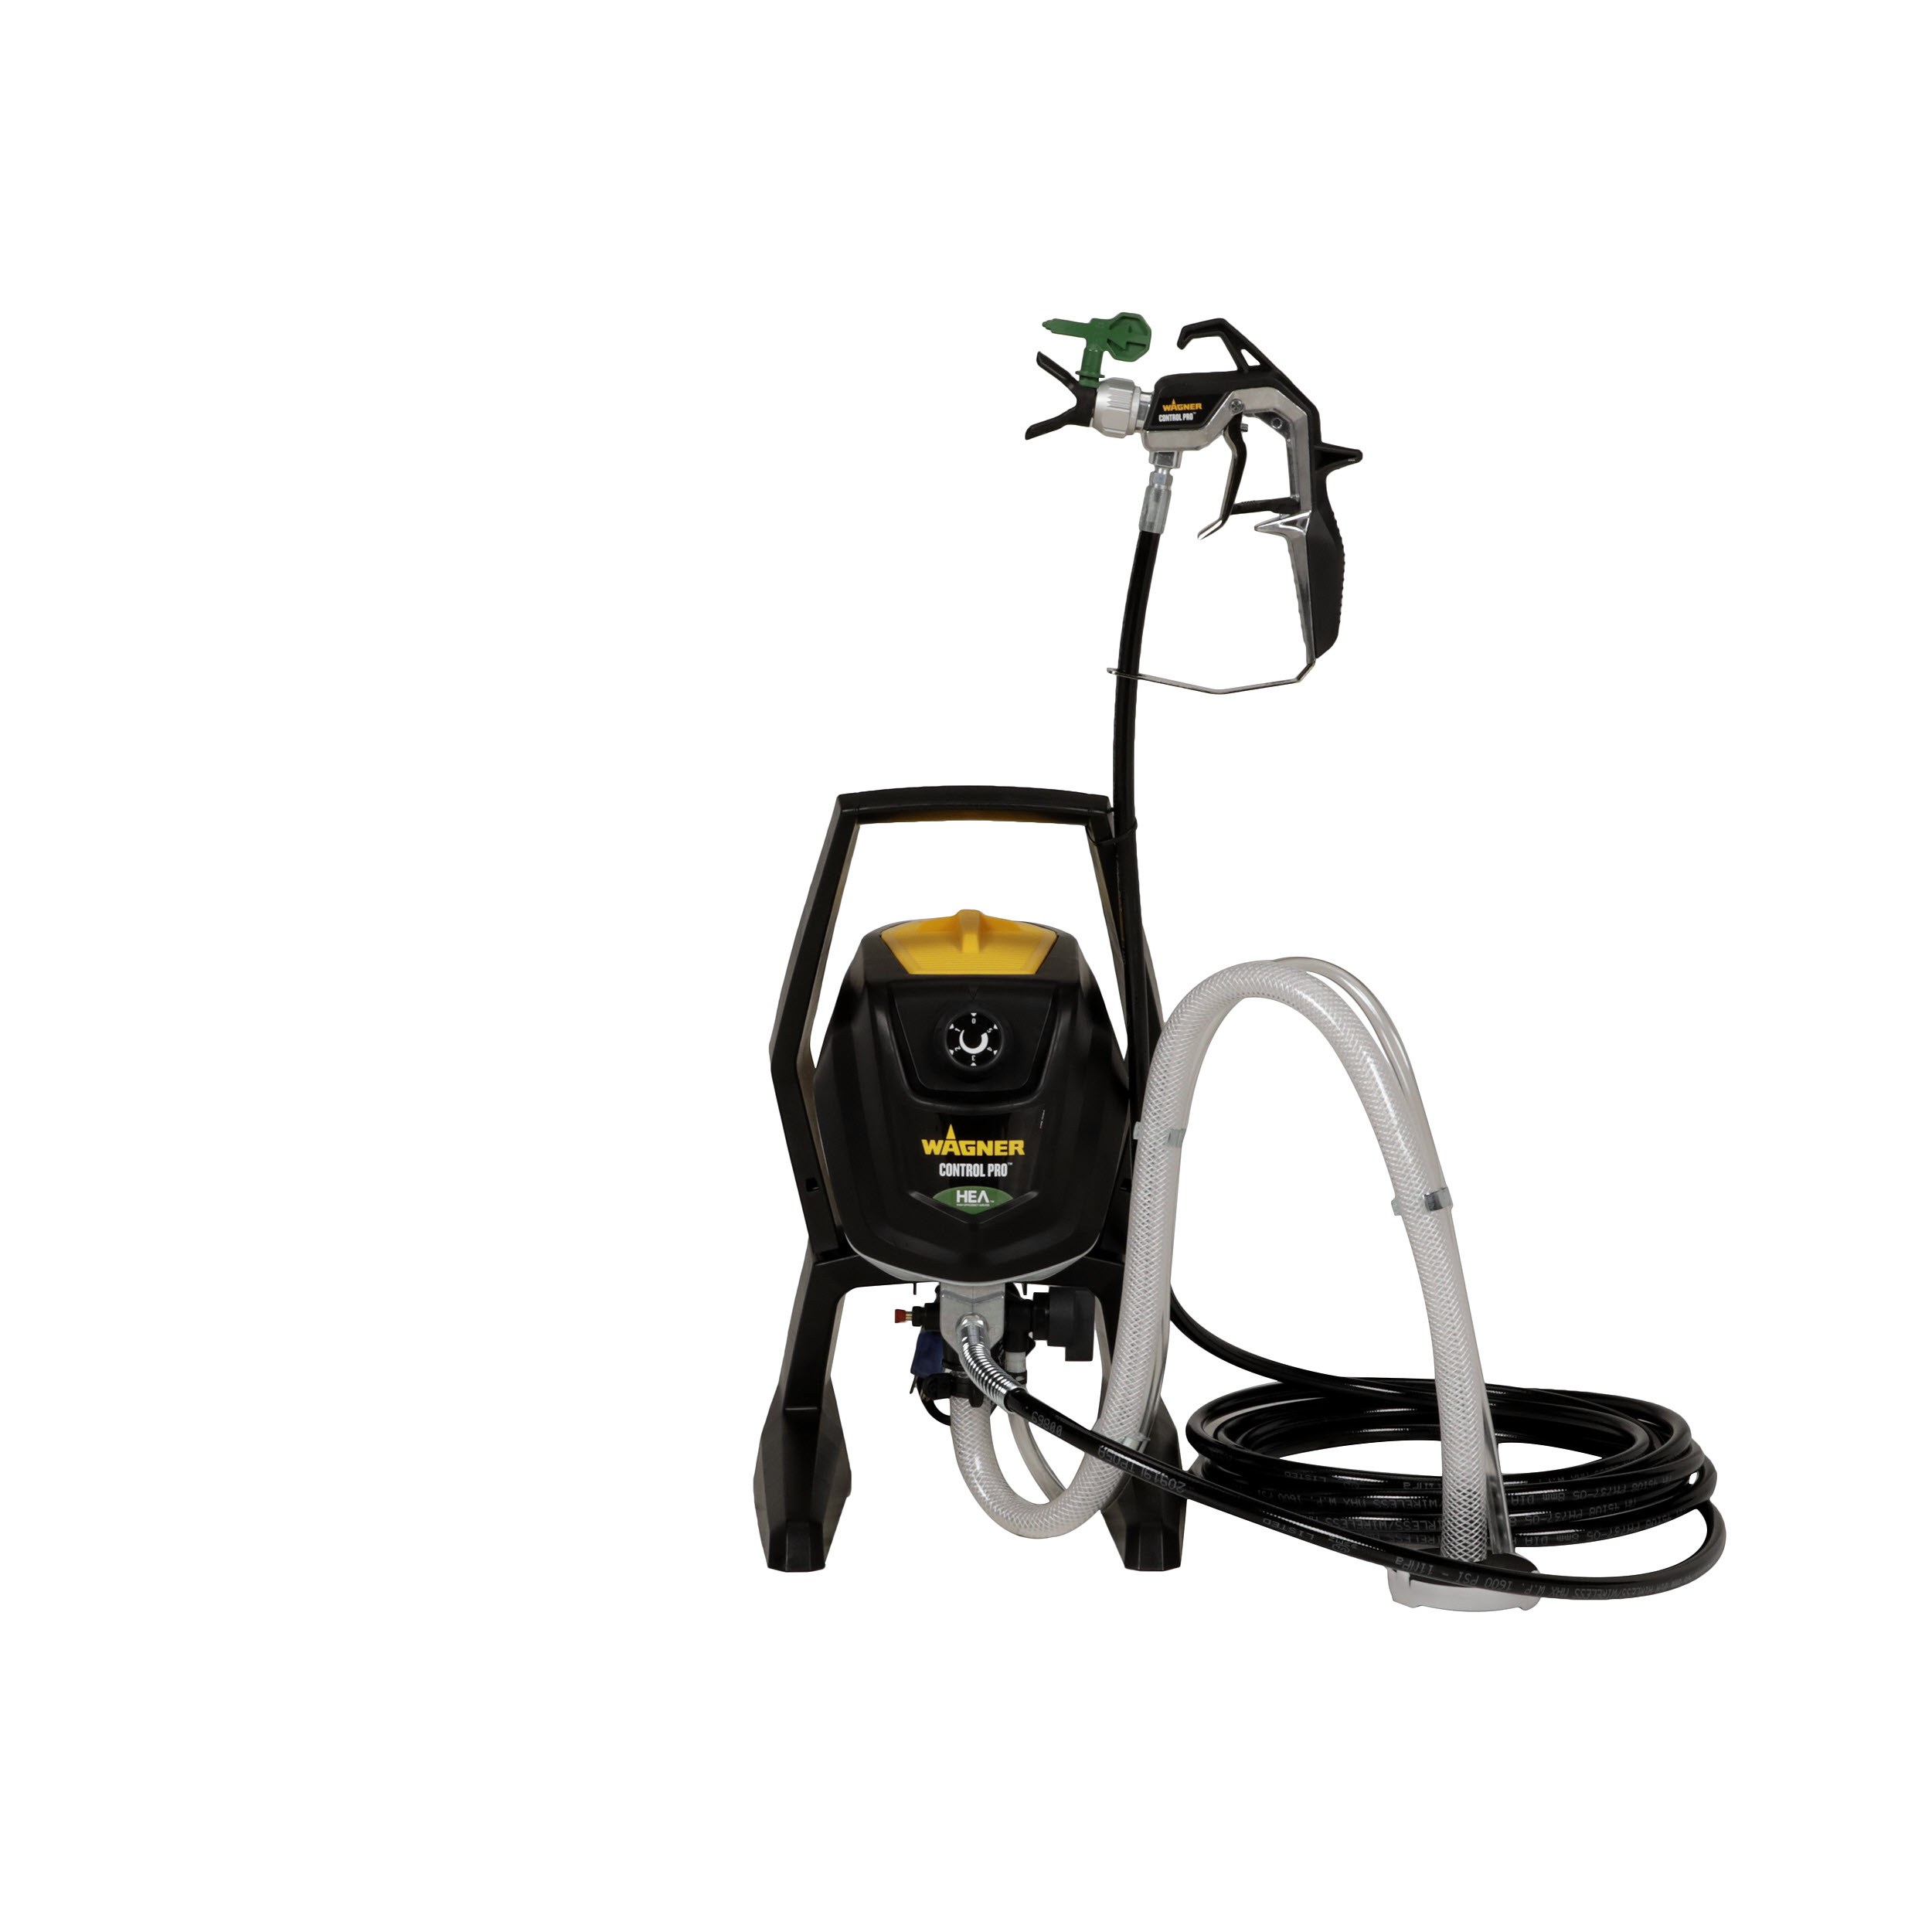 Sprayer, Pro 150 Efficiency Wagner with High Control Paint Low Airless Overspray